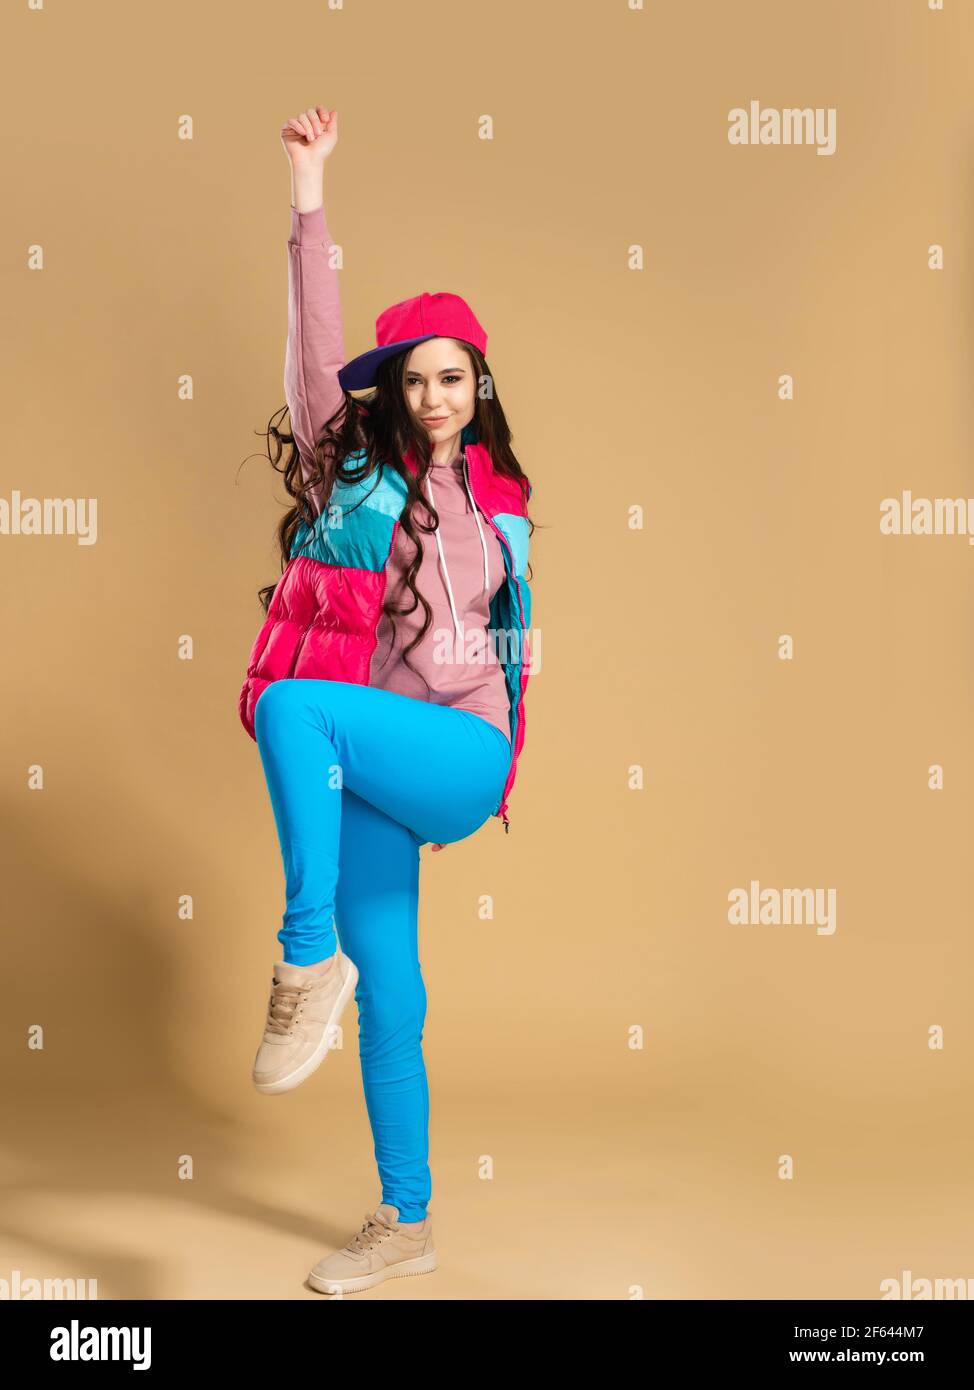 Young girl in a pink baseball cap with long hair in a bright multi-colored vest and blue leggings raises her hand up against an orange studio backgrou Stock Photo